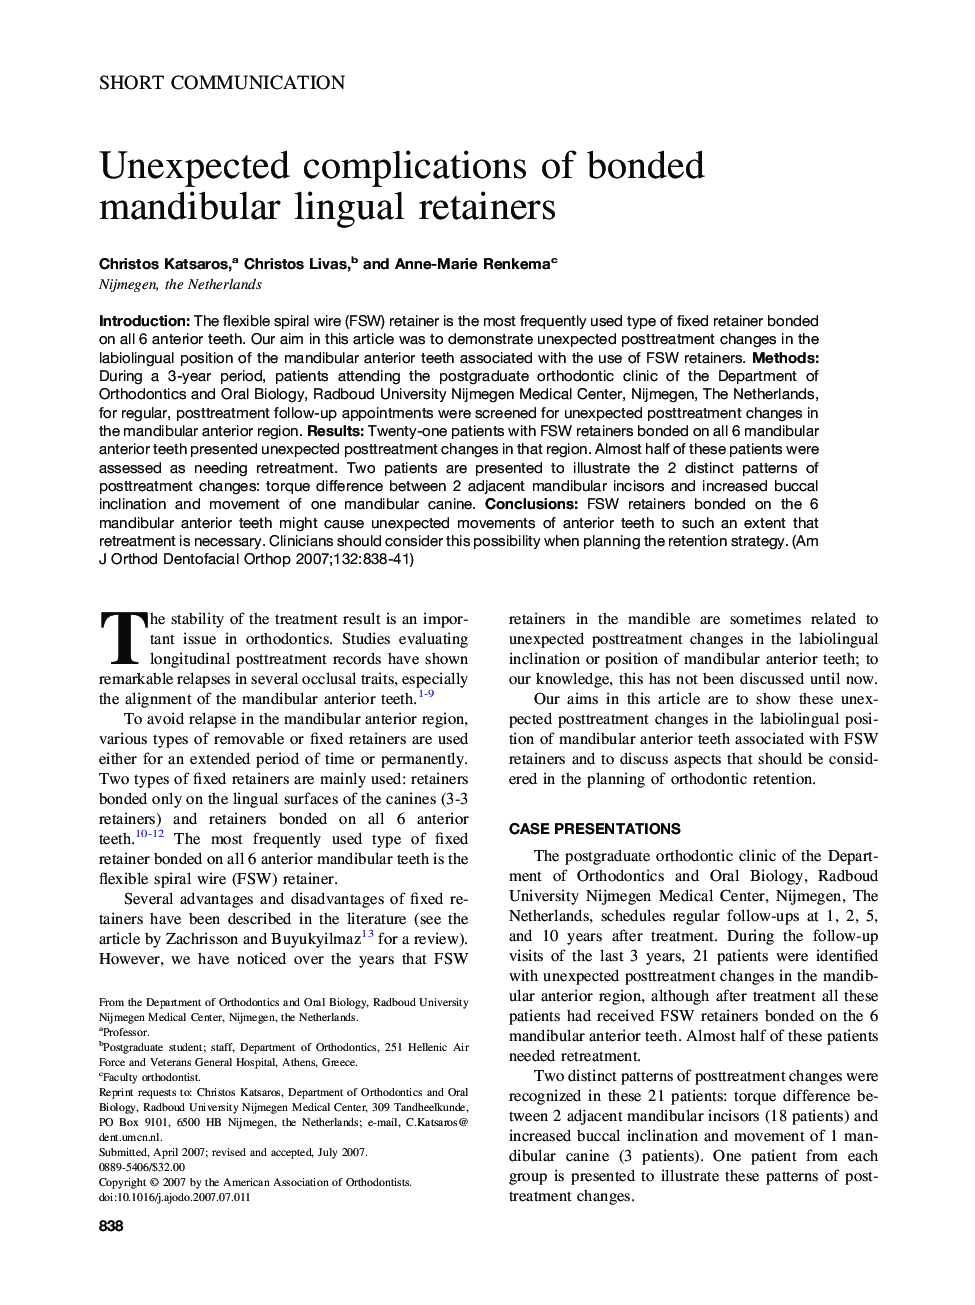 Unexpected complications of bonded mandibular lingual retainers